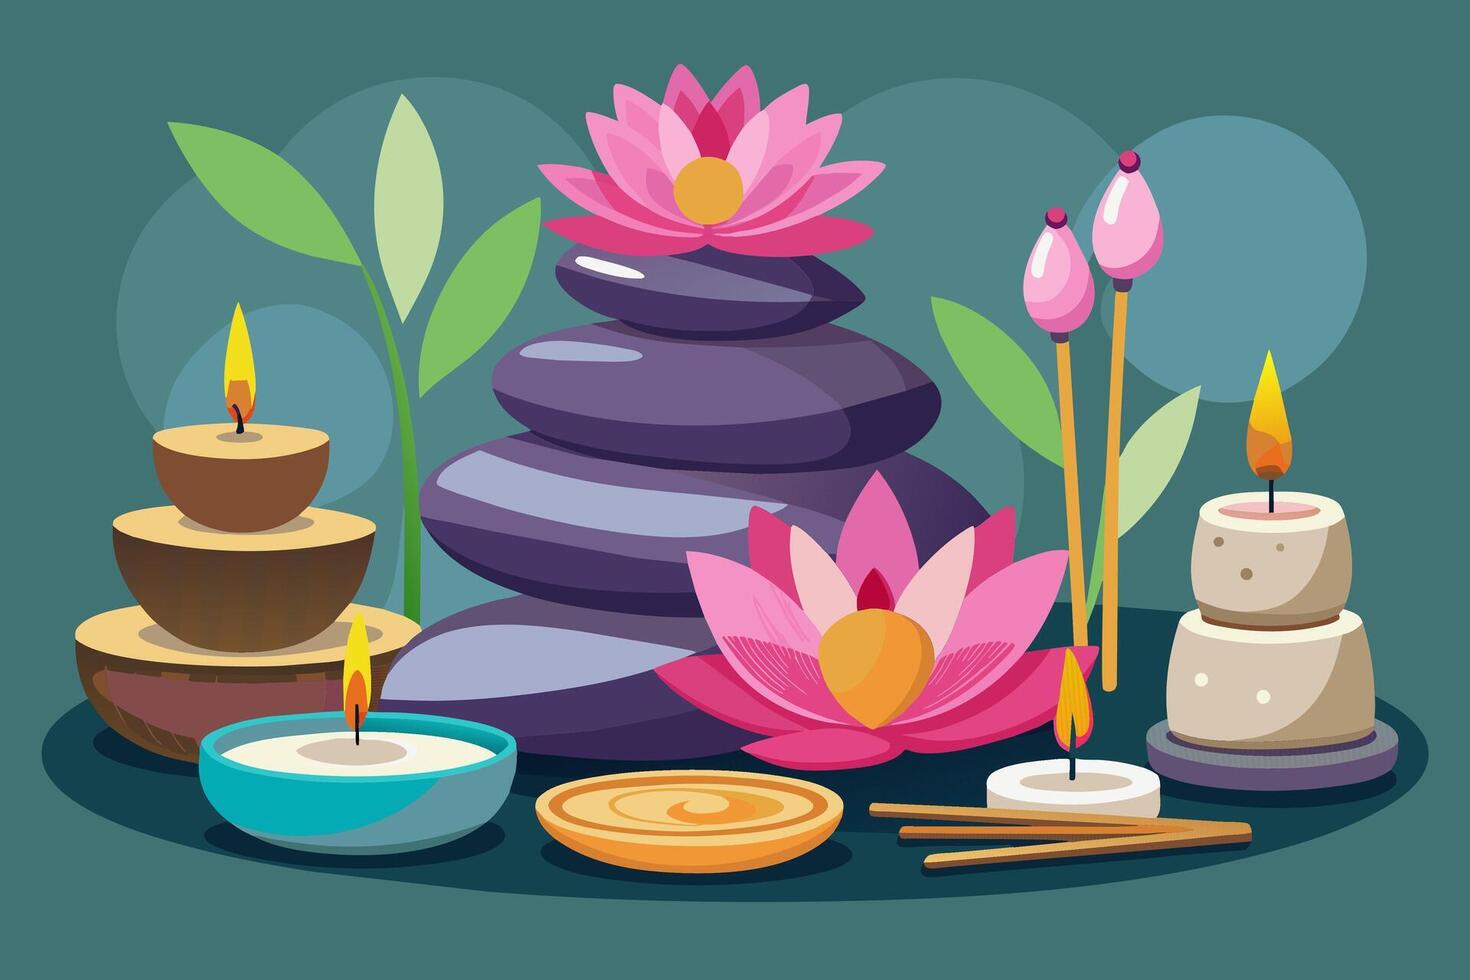 Zen spa arrangement with stacked stones, candles, and lotus flowers. Peaceful spa setting illustration. Concept of relaxation, meditation, spa decor, tranquil environment. Graphic art vector